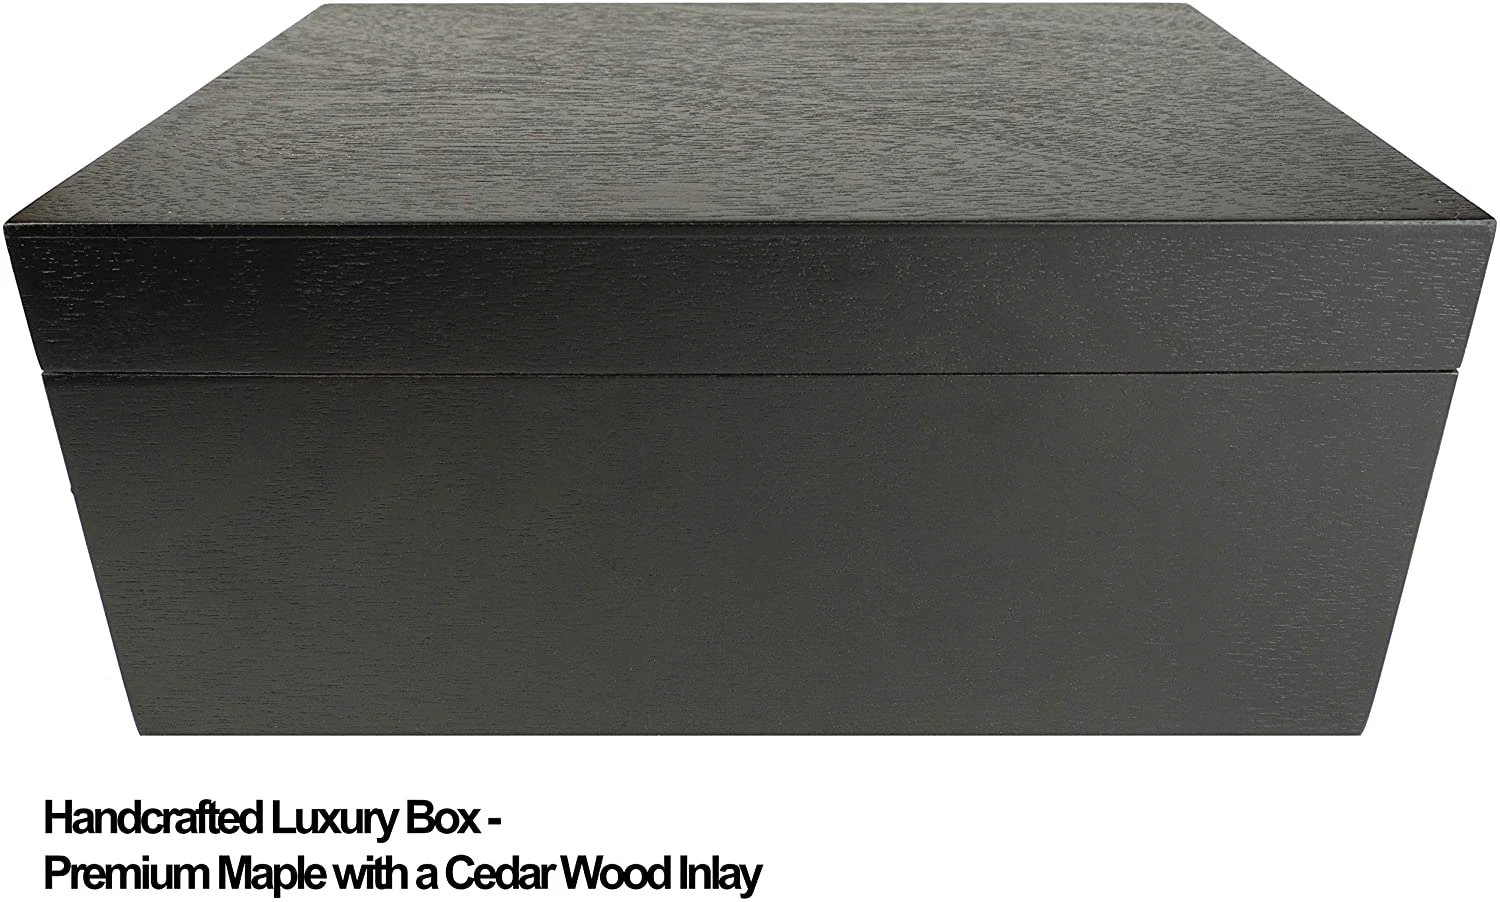 Large Wooden Box with Hinged Lid - Black Stash Wooden Storage Box - Decorative boxes with lids